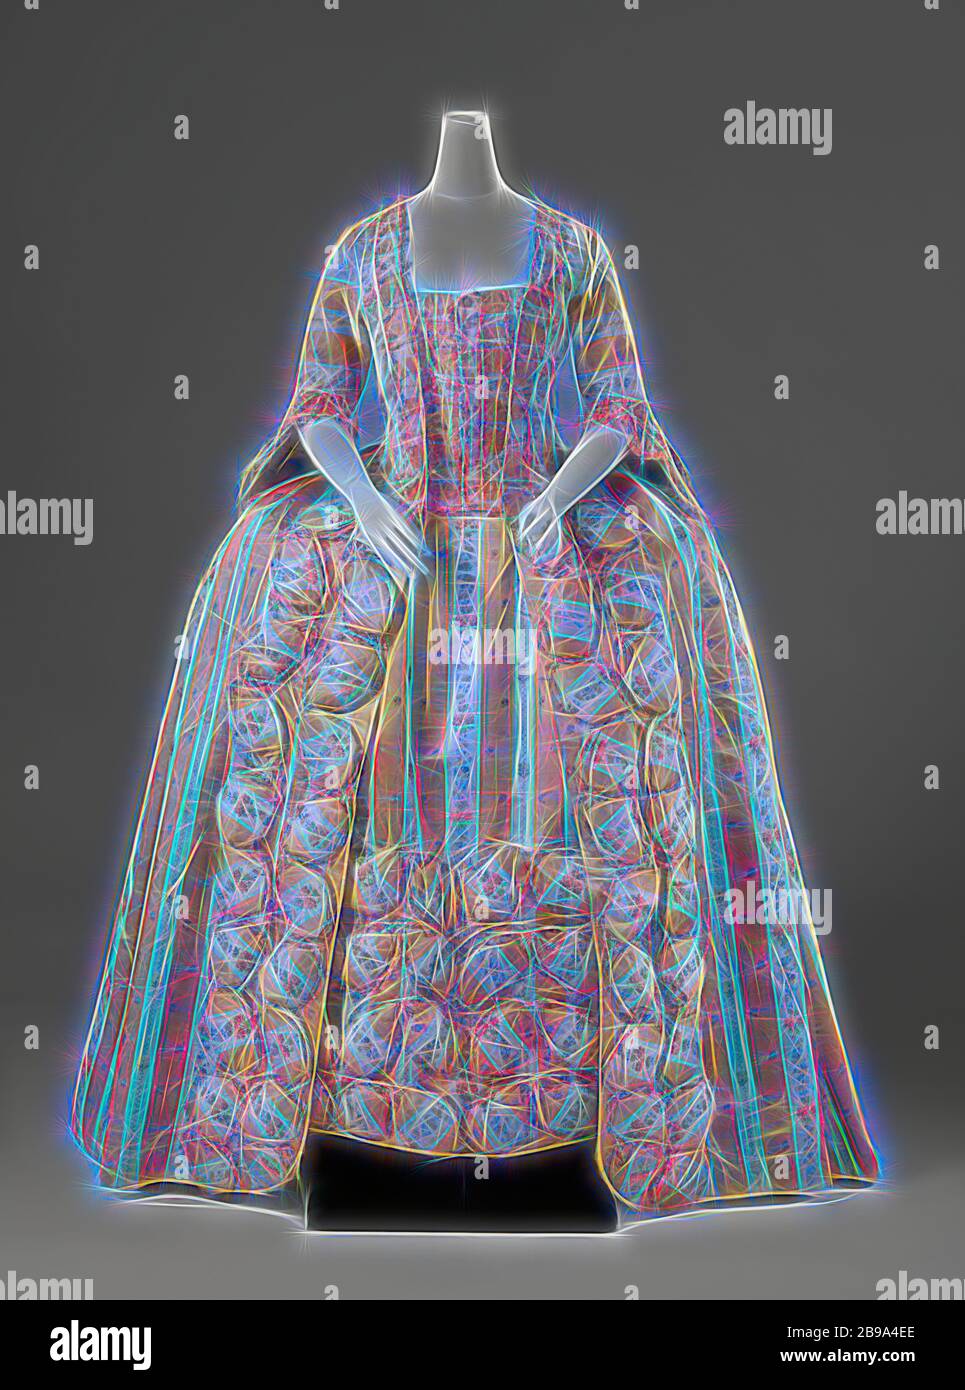 Skirt of a frock or robe à la française made of silk with vertical yellow  and white stripes and a multi-colored flower pattern with oval pouffes and  lined with a multi-colored chiné,